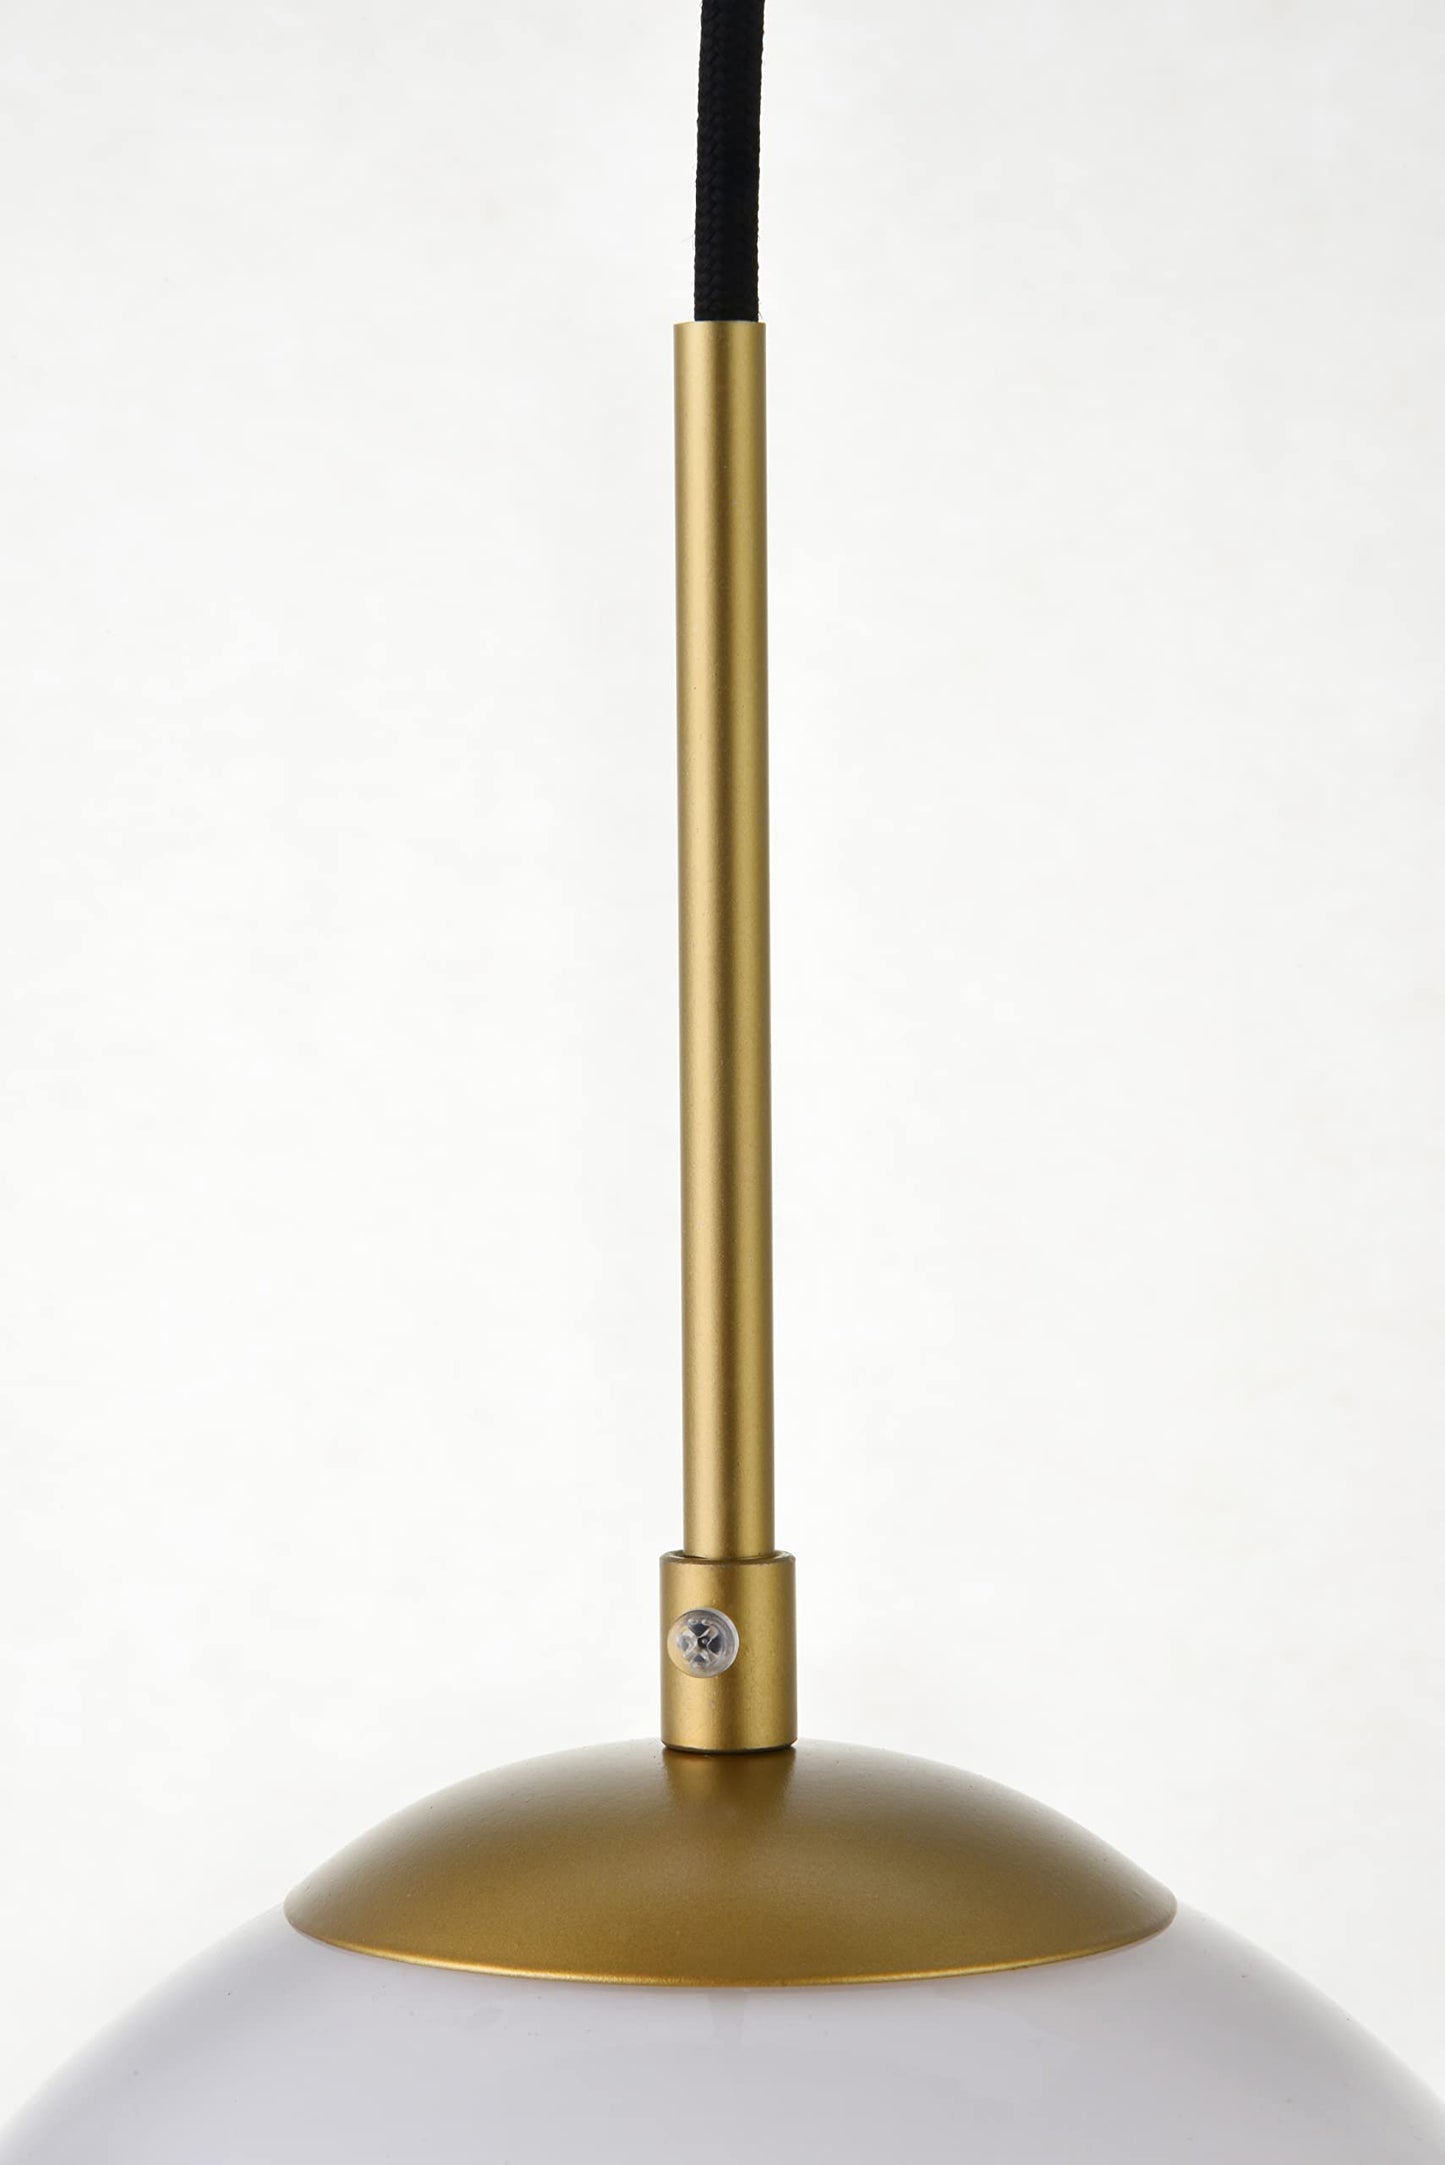 Living District Baxter 1 Light Brass Pendant with Frosted White Glass